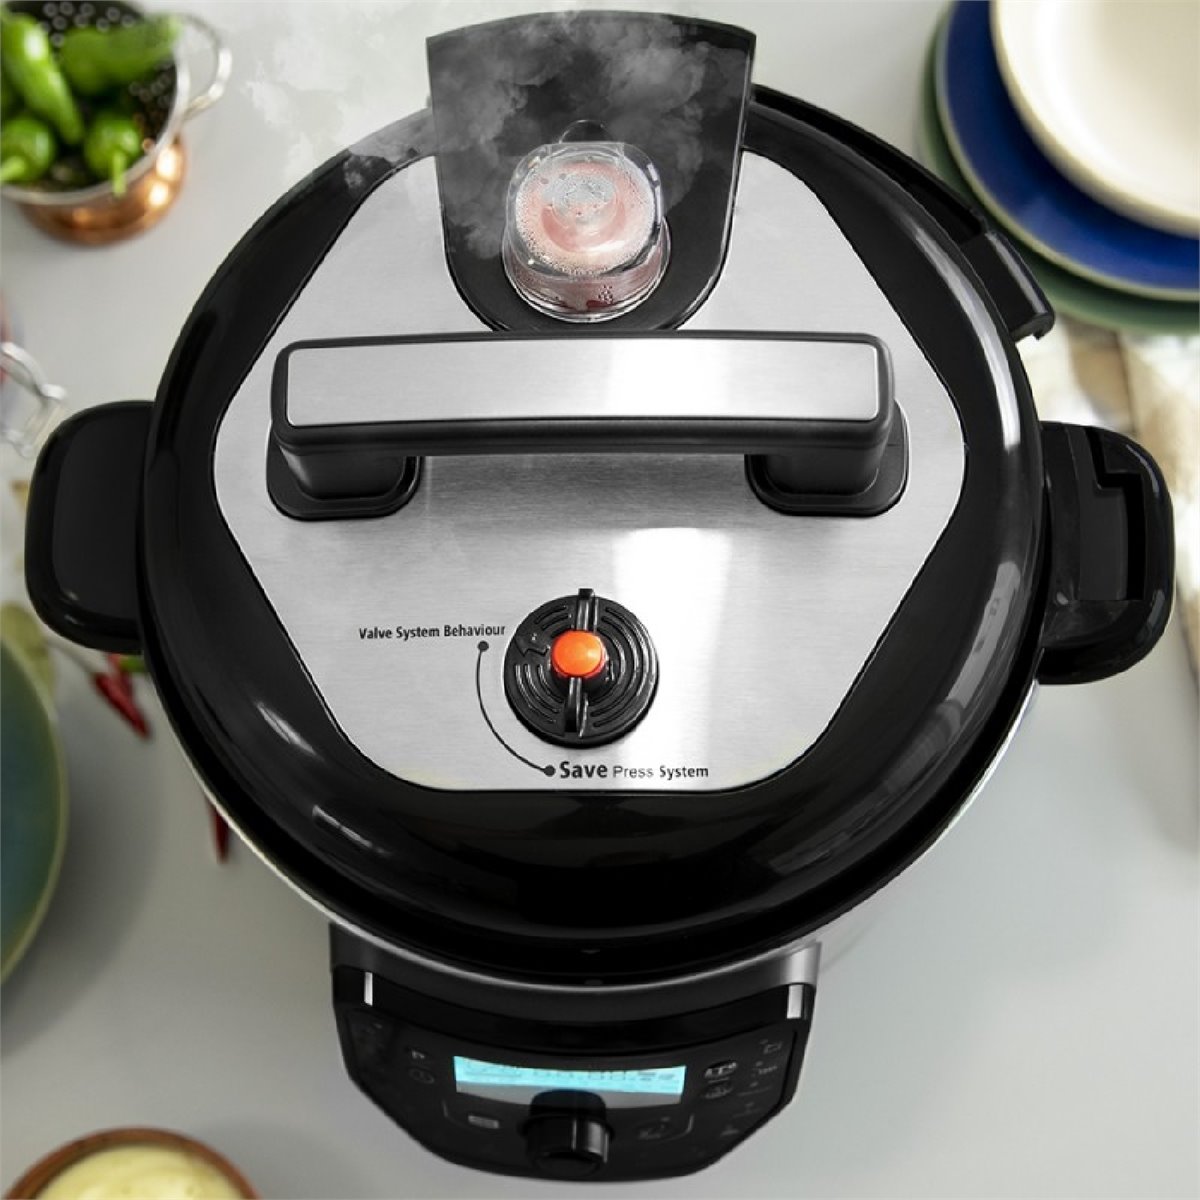 Cecotec English - Olla GM Model H Deluxe programmable electric cooker by  Cecotec. 6-litre capacity and 24-hour timer. Includes scale function and  innovative Advance folding cover, more comfortable for pressure release.  👉